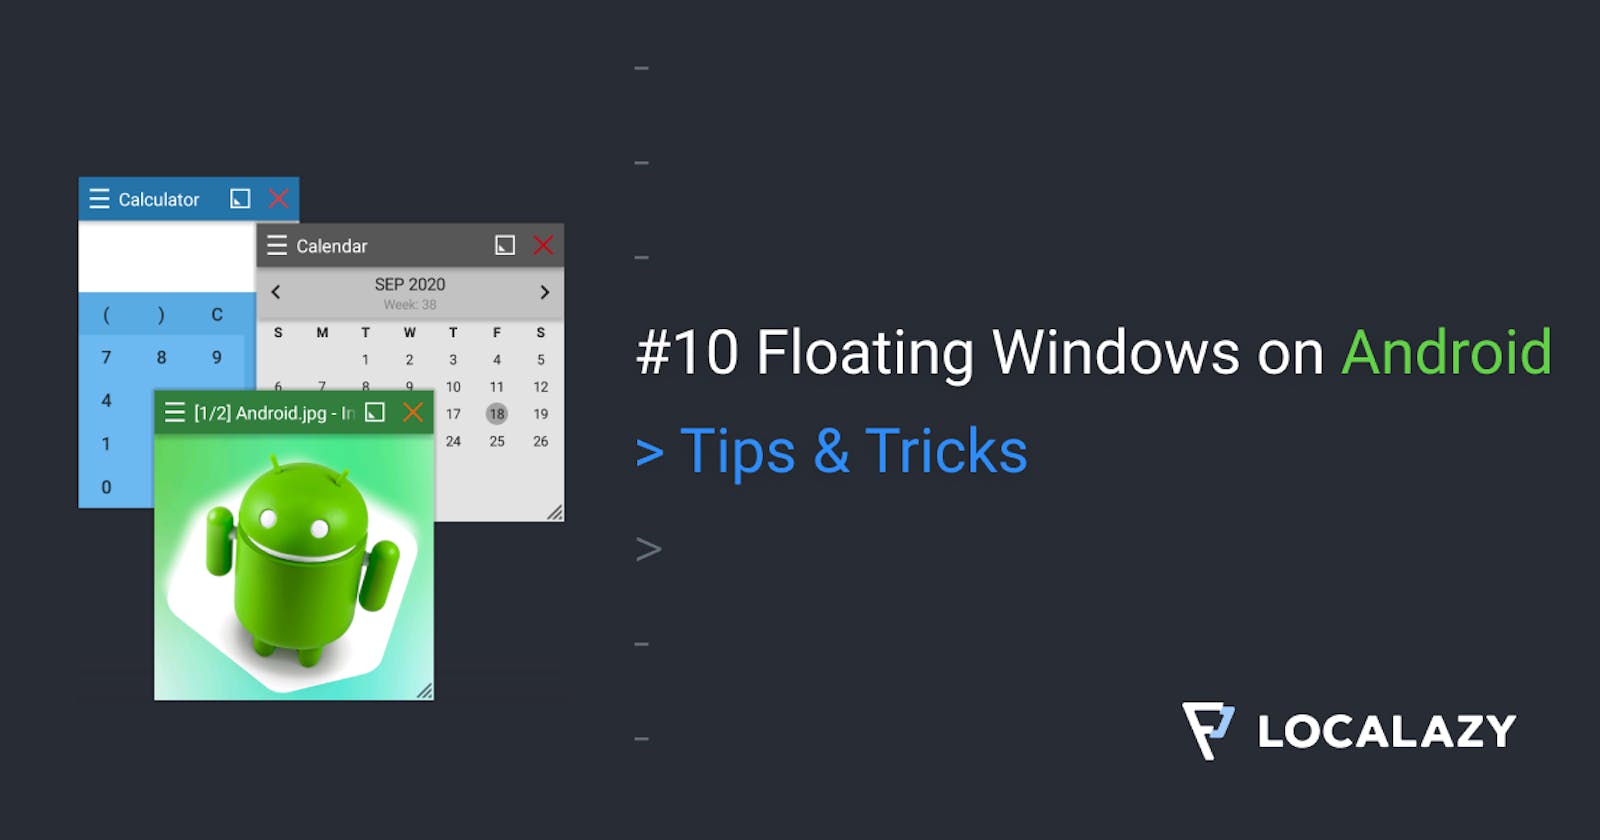 From Android's floating windows to Floating Apps: final tech pieces